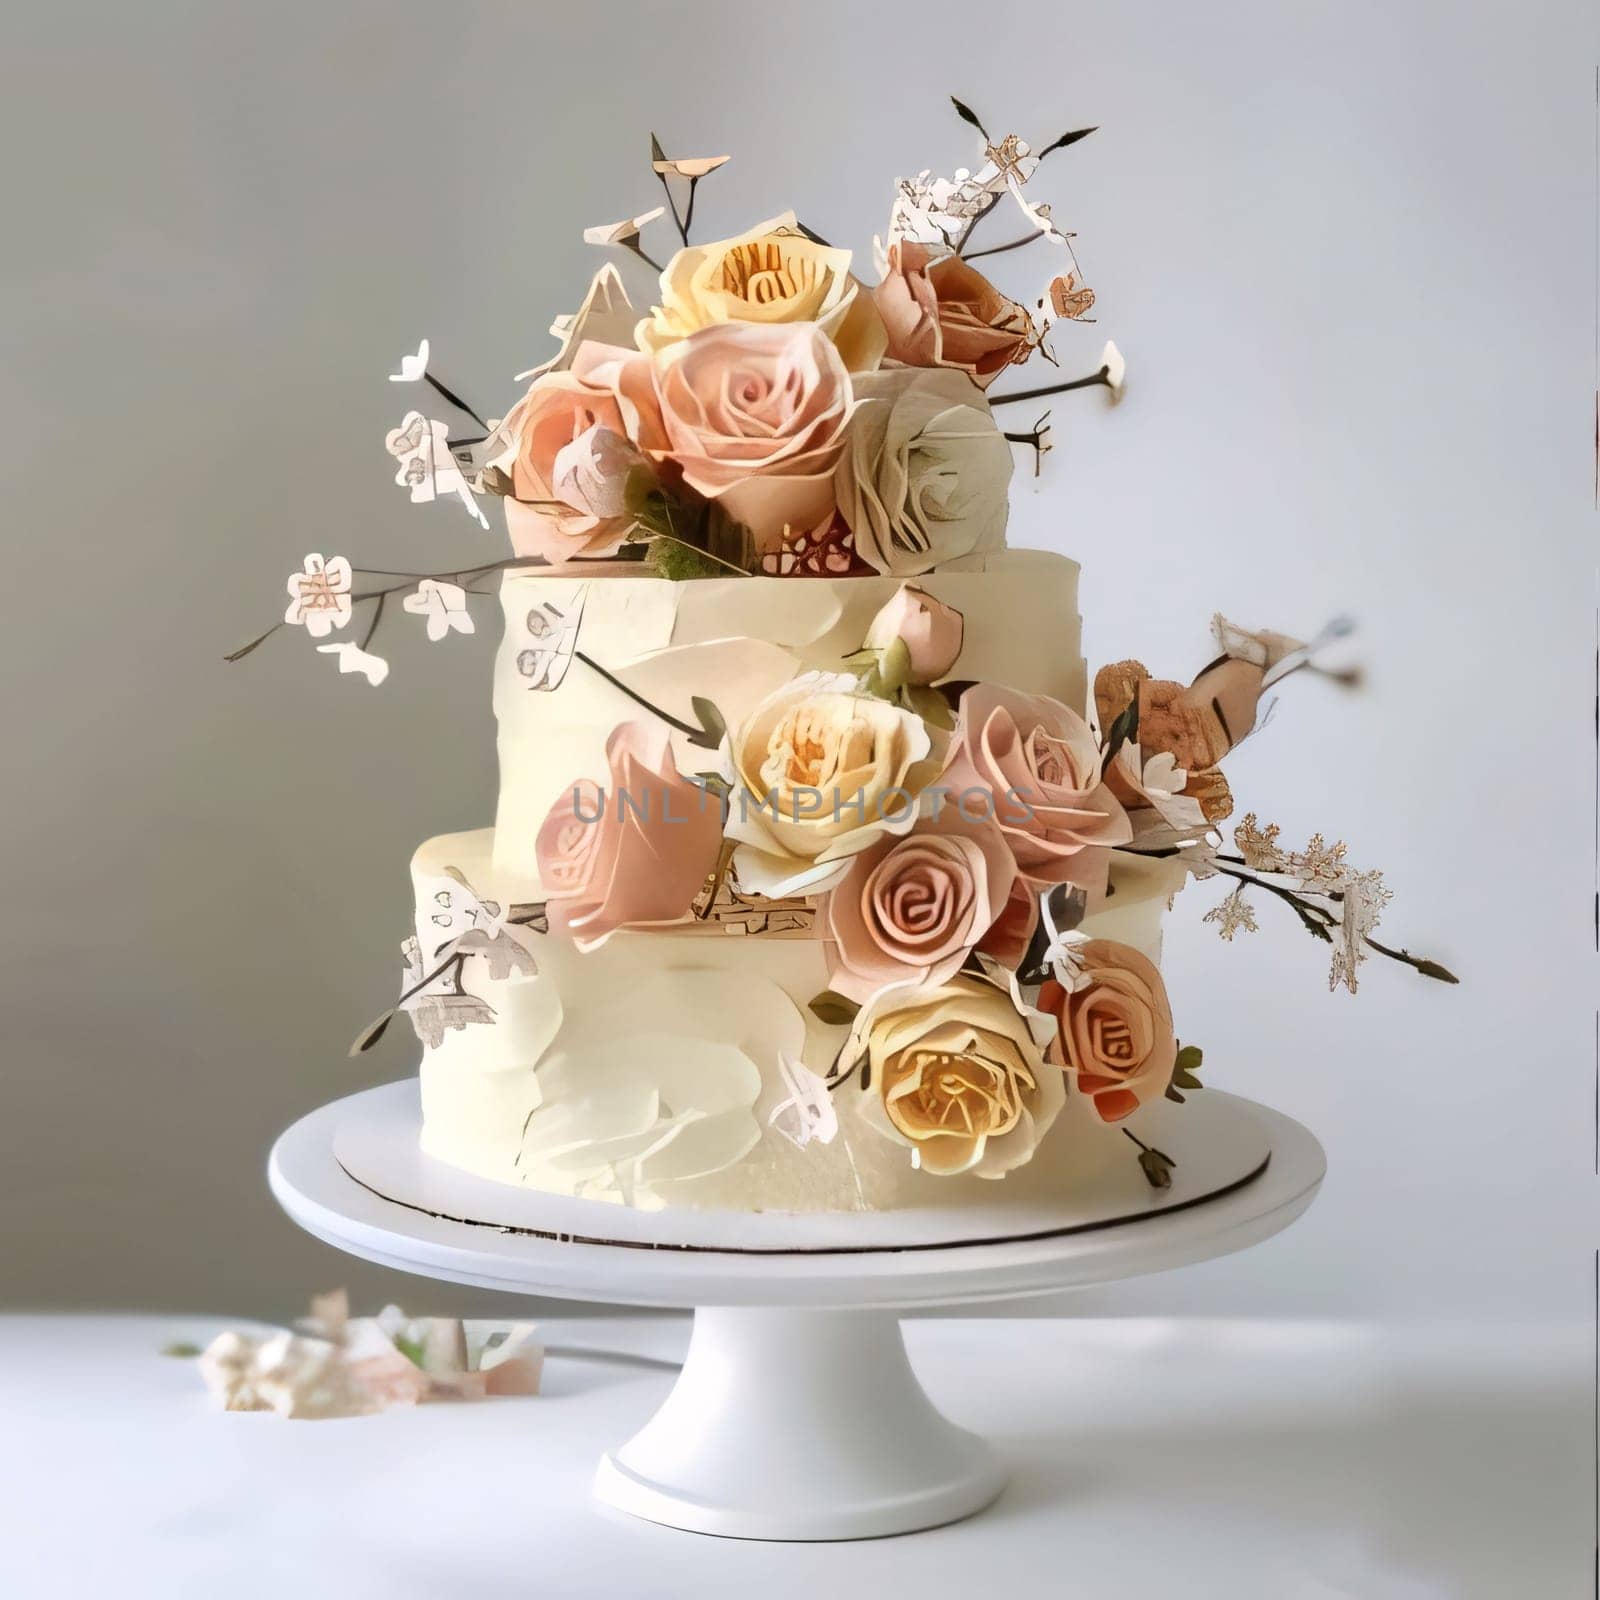 Wedding cake with flowers roses on a white stand, light background. Flowering flowers, a symbol of spring, new life. A joyful time of nature waking up to life.